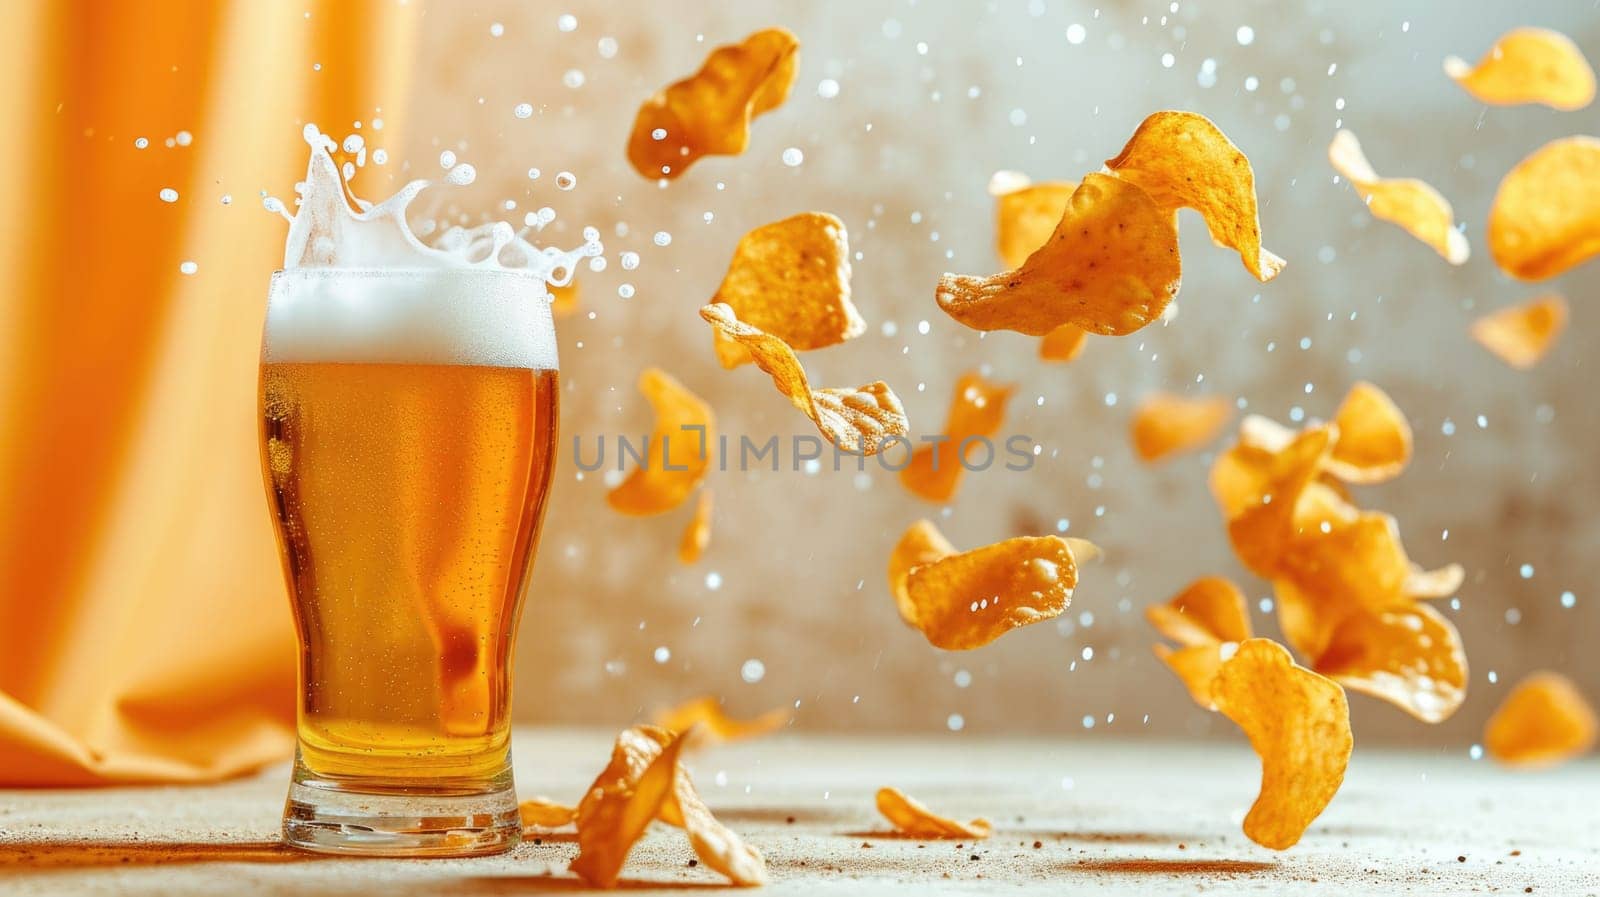 Fascinating image: chips hover over a glass of beer, creating an amazing effect of levitation and magic, inspiring fantasies and creative ideas.